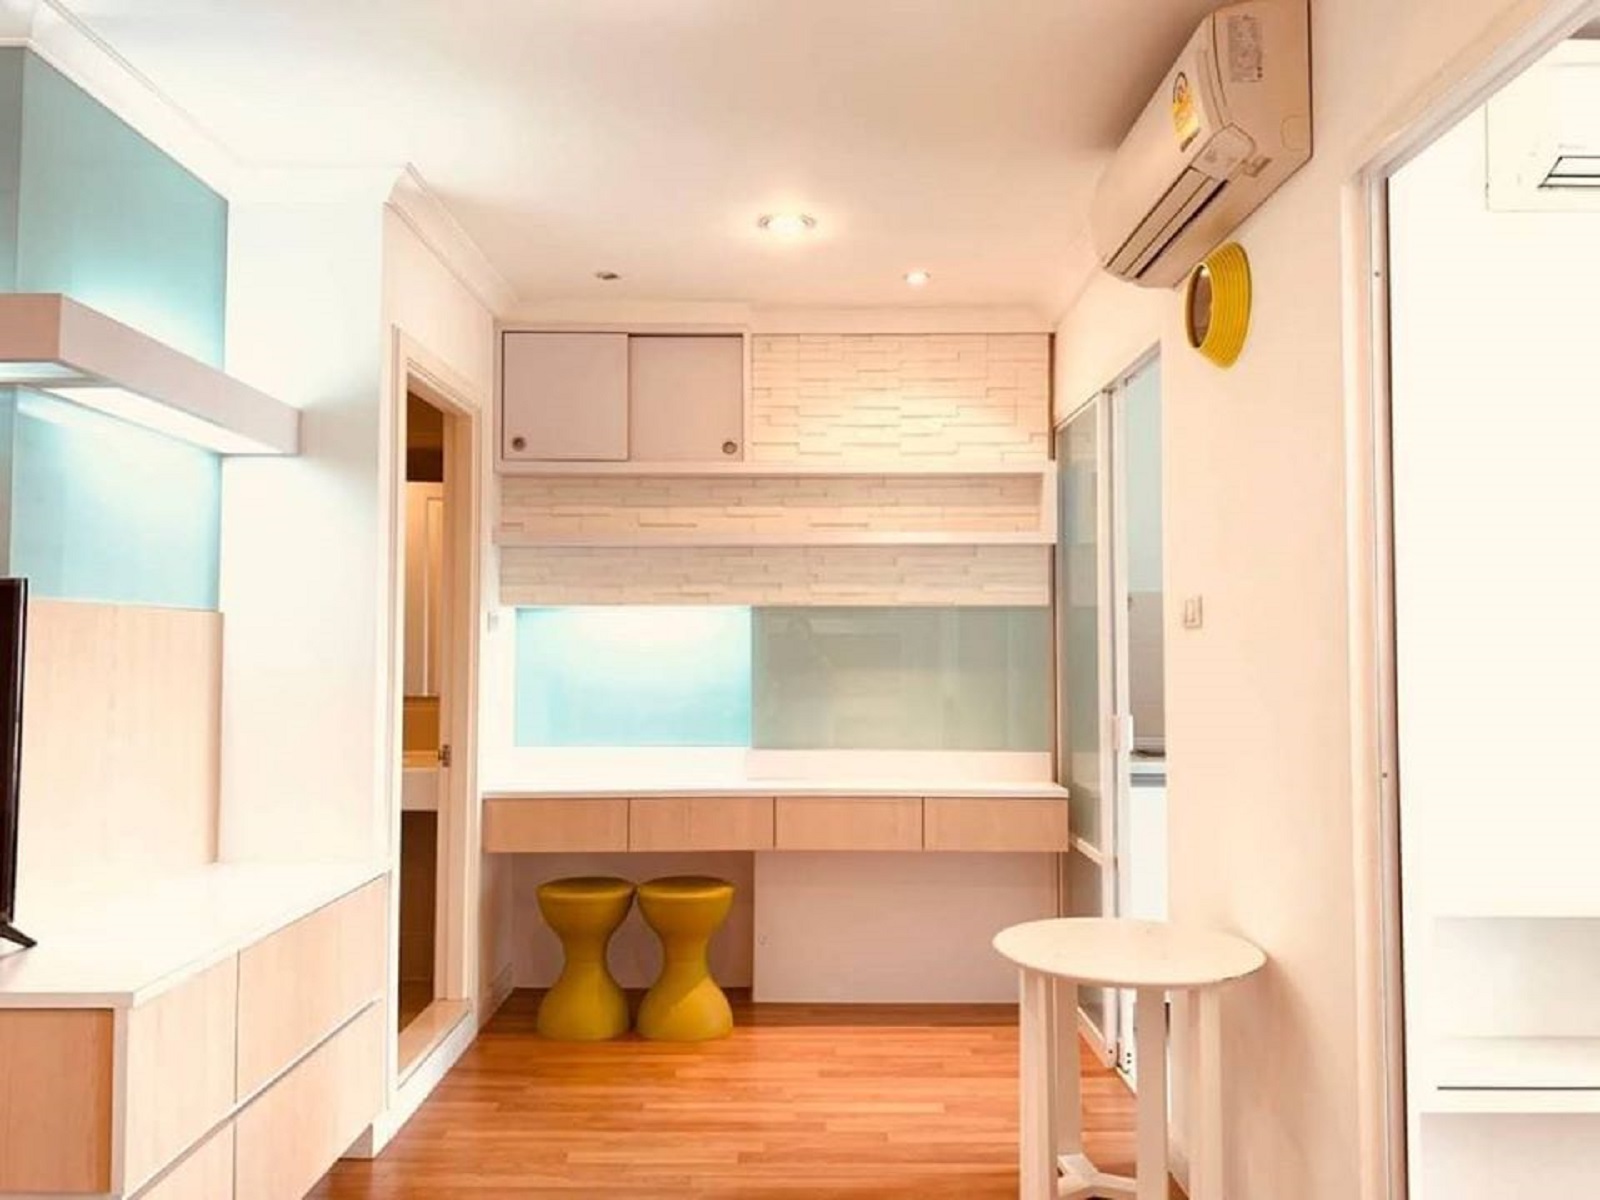 Condo for sale with a tenant in Rama 9 - 1-bedroom - high floor - Lumpini Place Rama 9-Ratchada